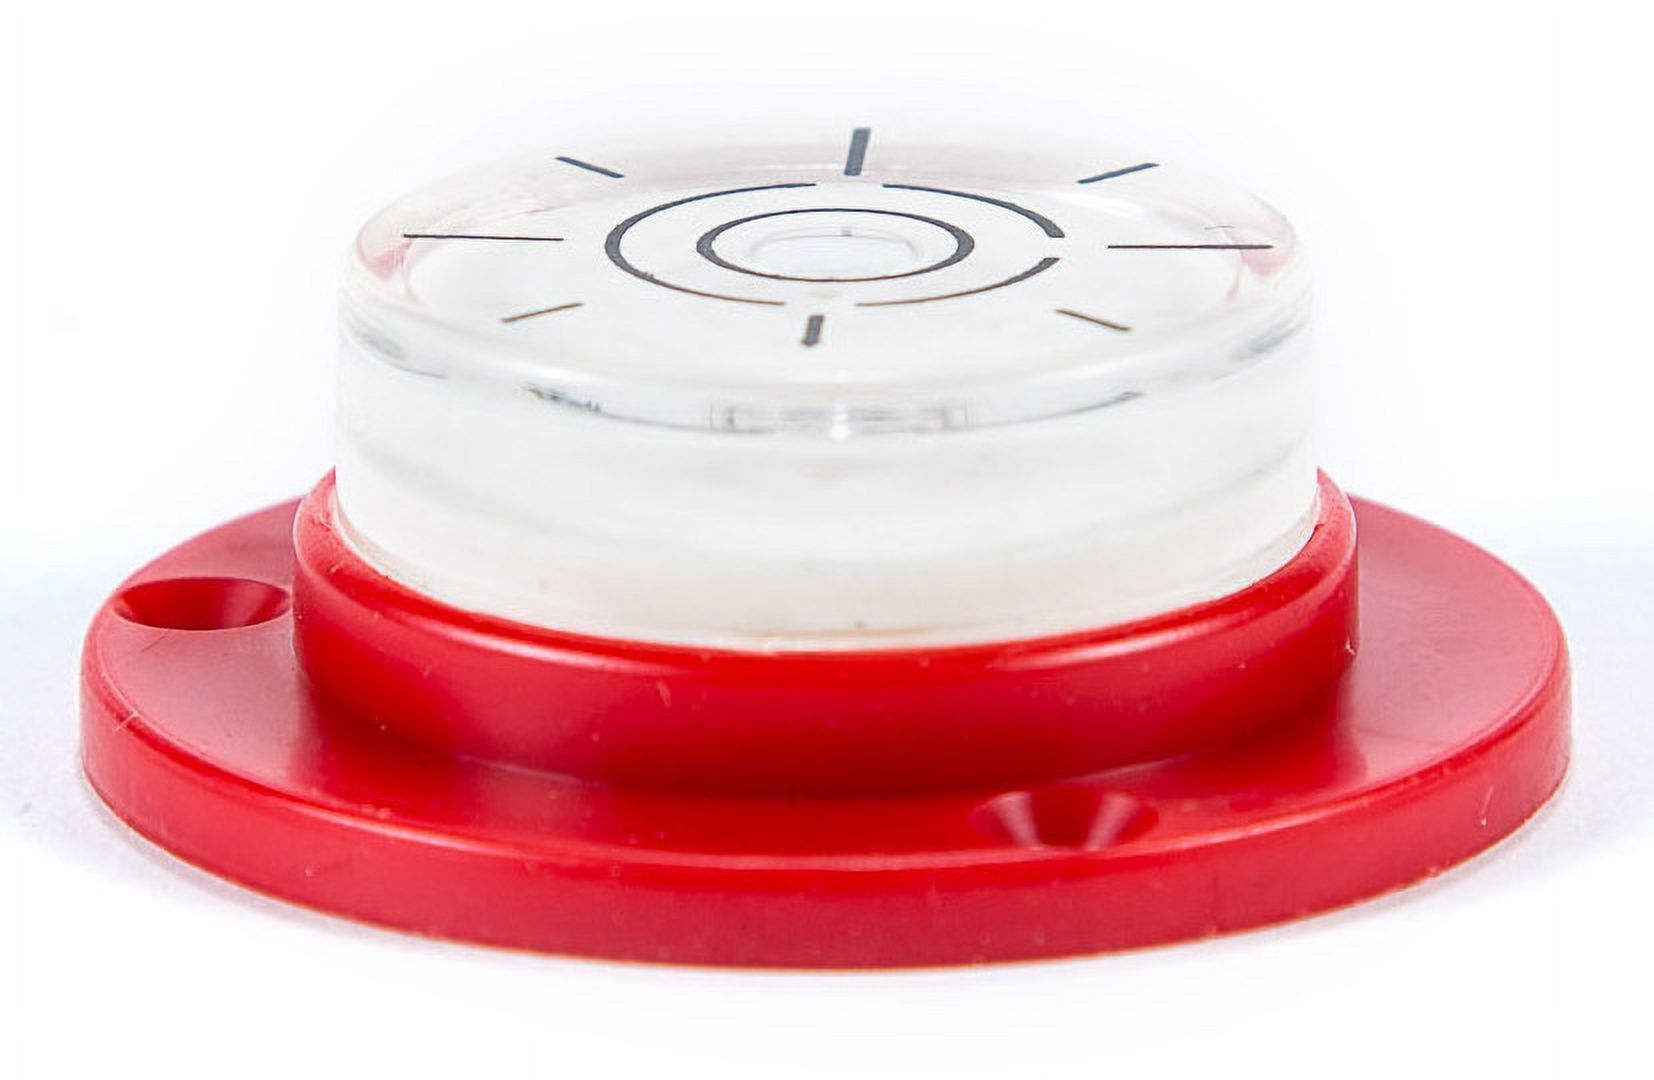 Swanson SL0002 Red Round Surface Level with Spirit Bubble and Fastening Holes (Assembled 2 inches) - image 2 of 6